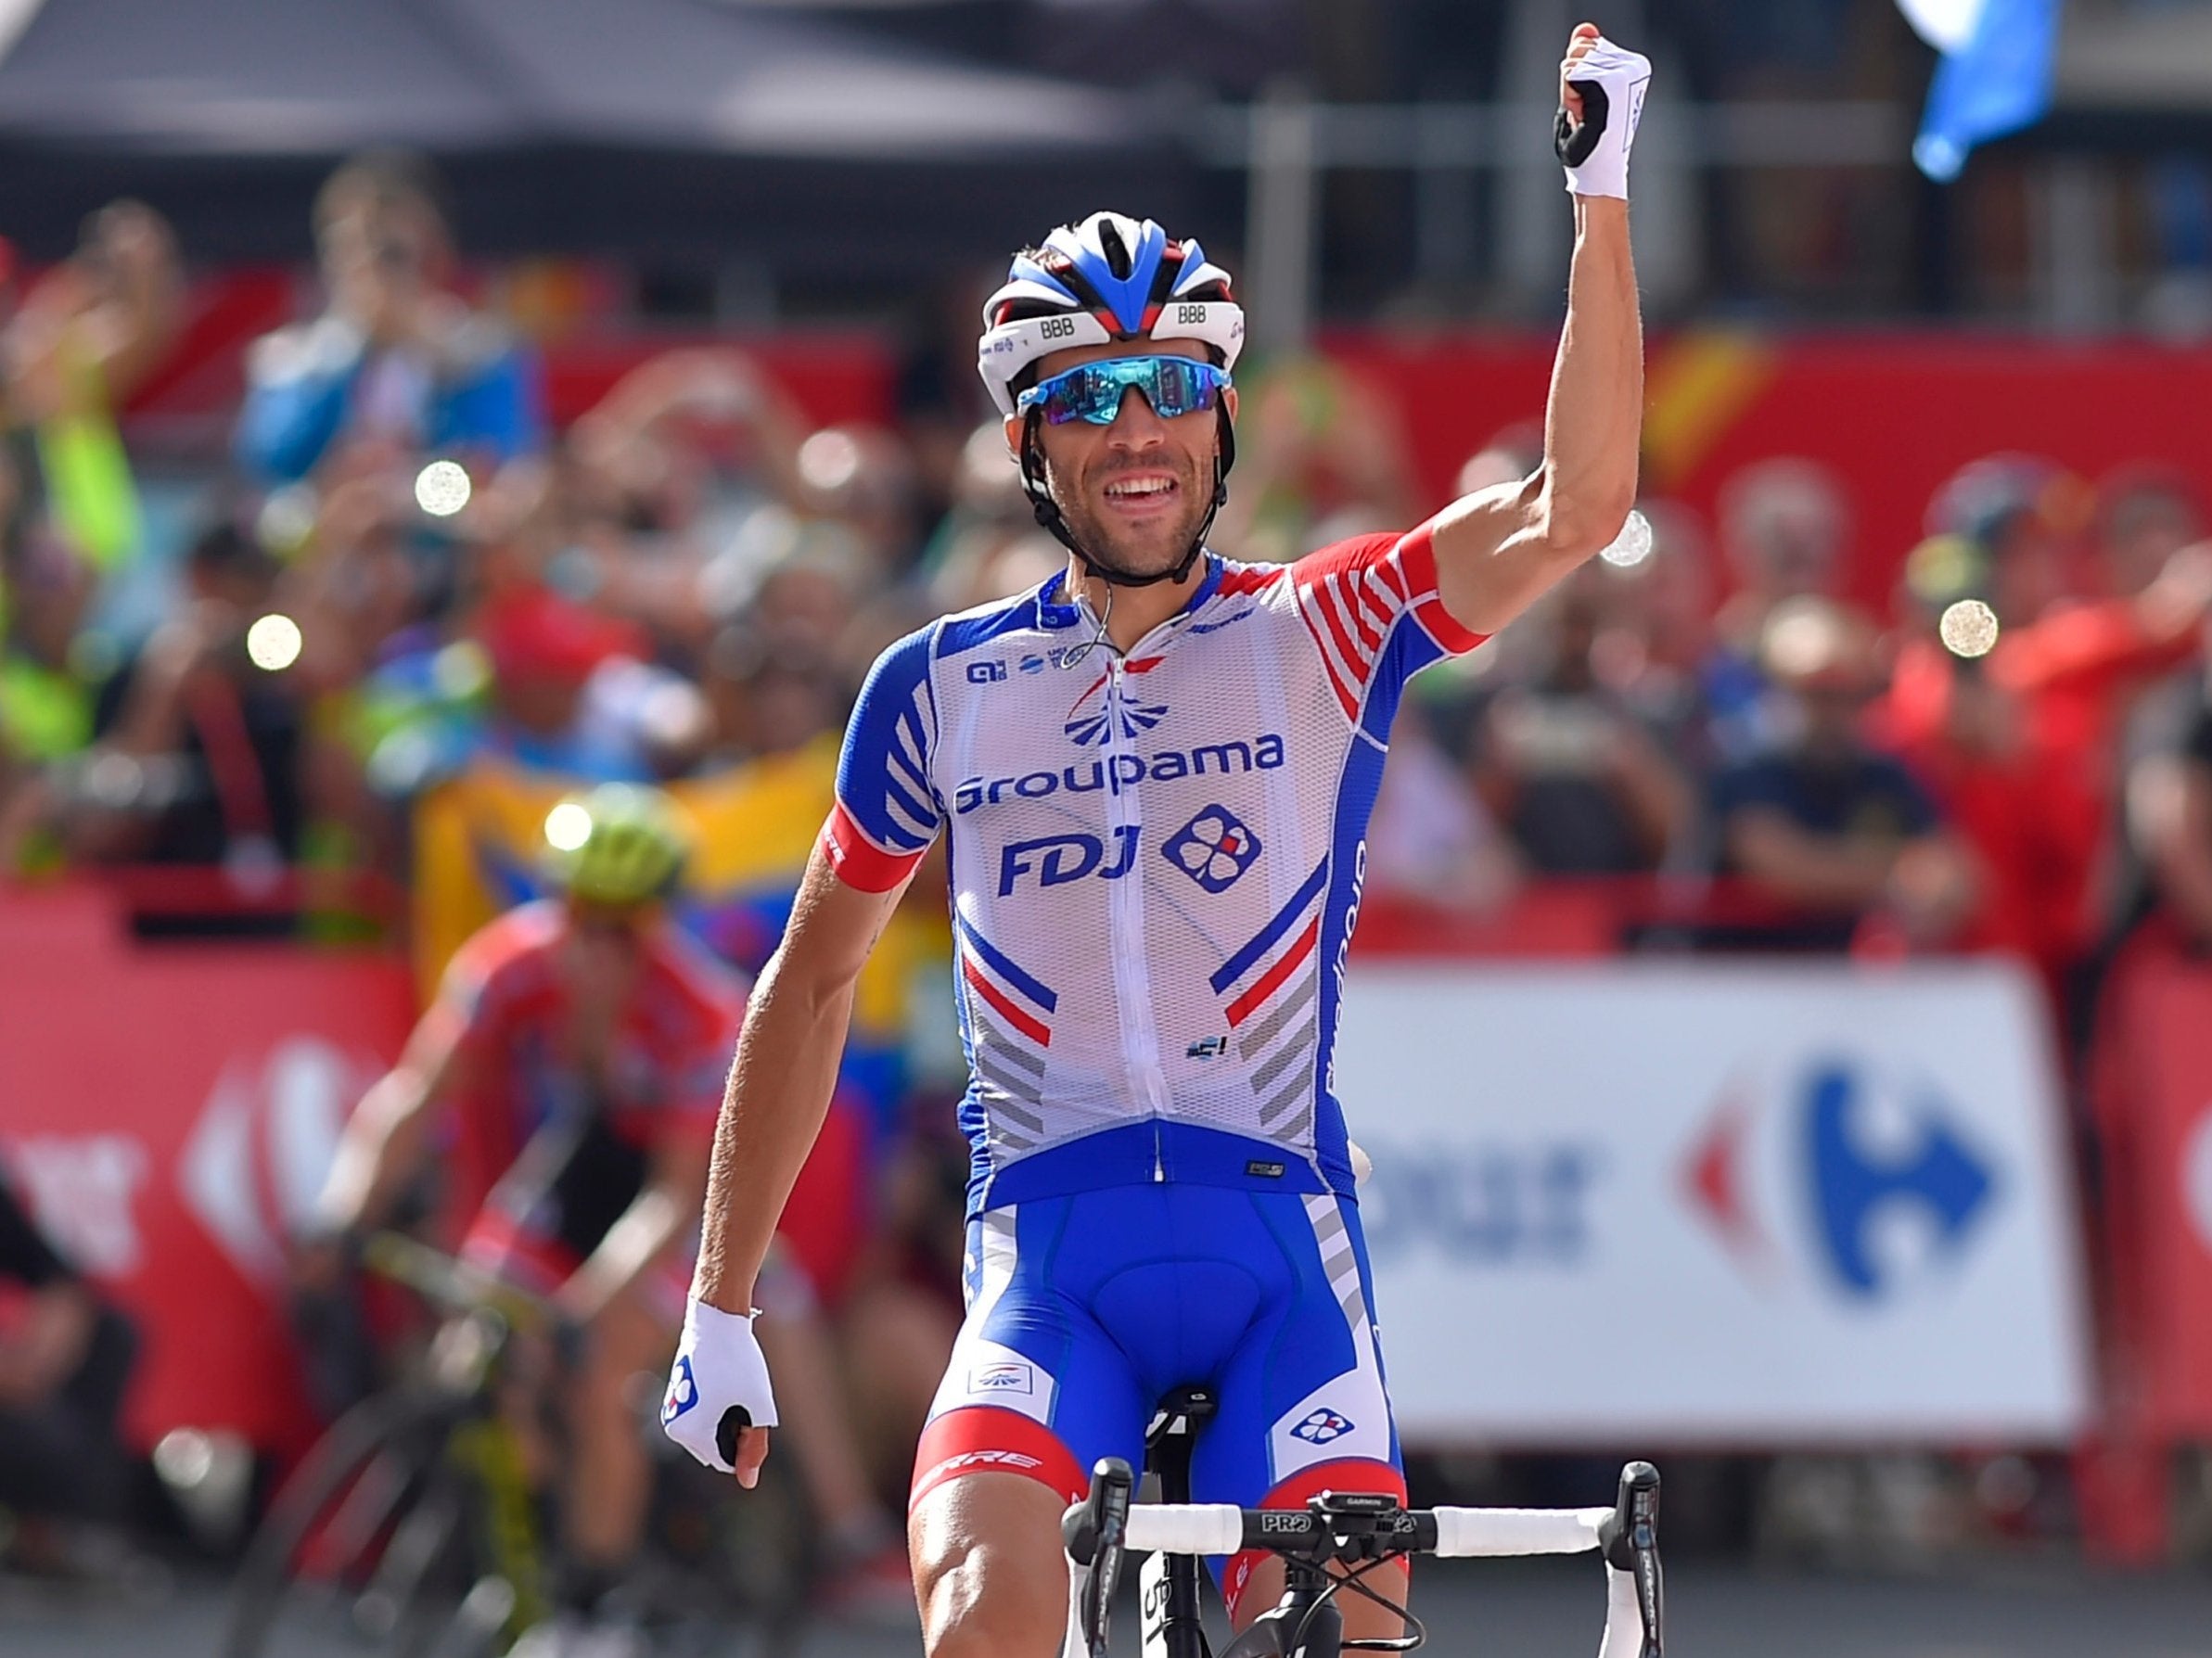 Thibaut Pinot won the stage as Yates, background, finished second